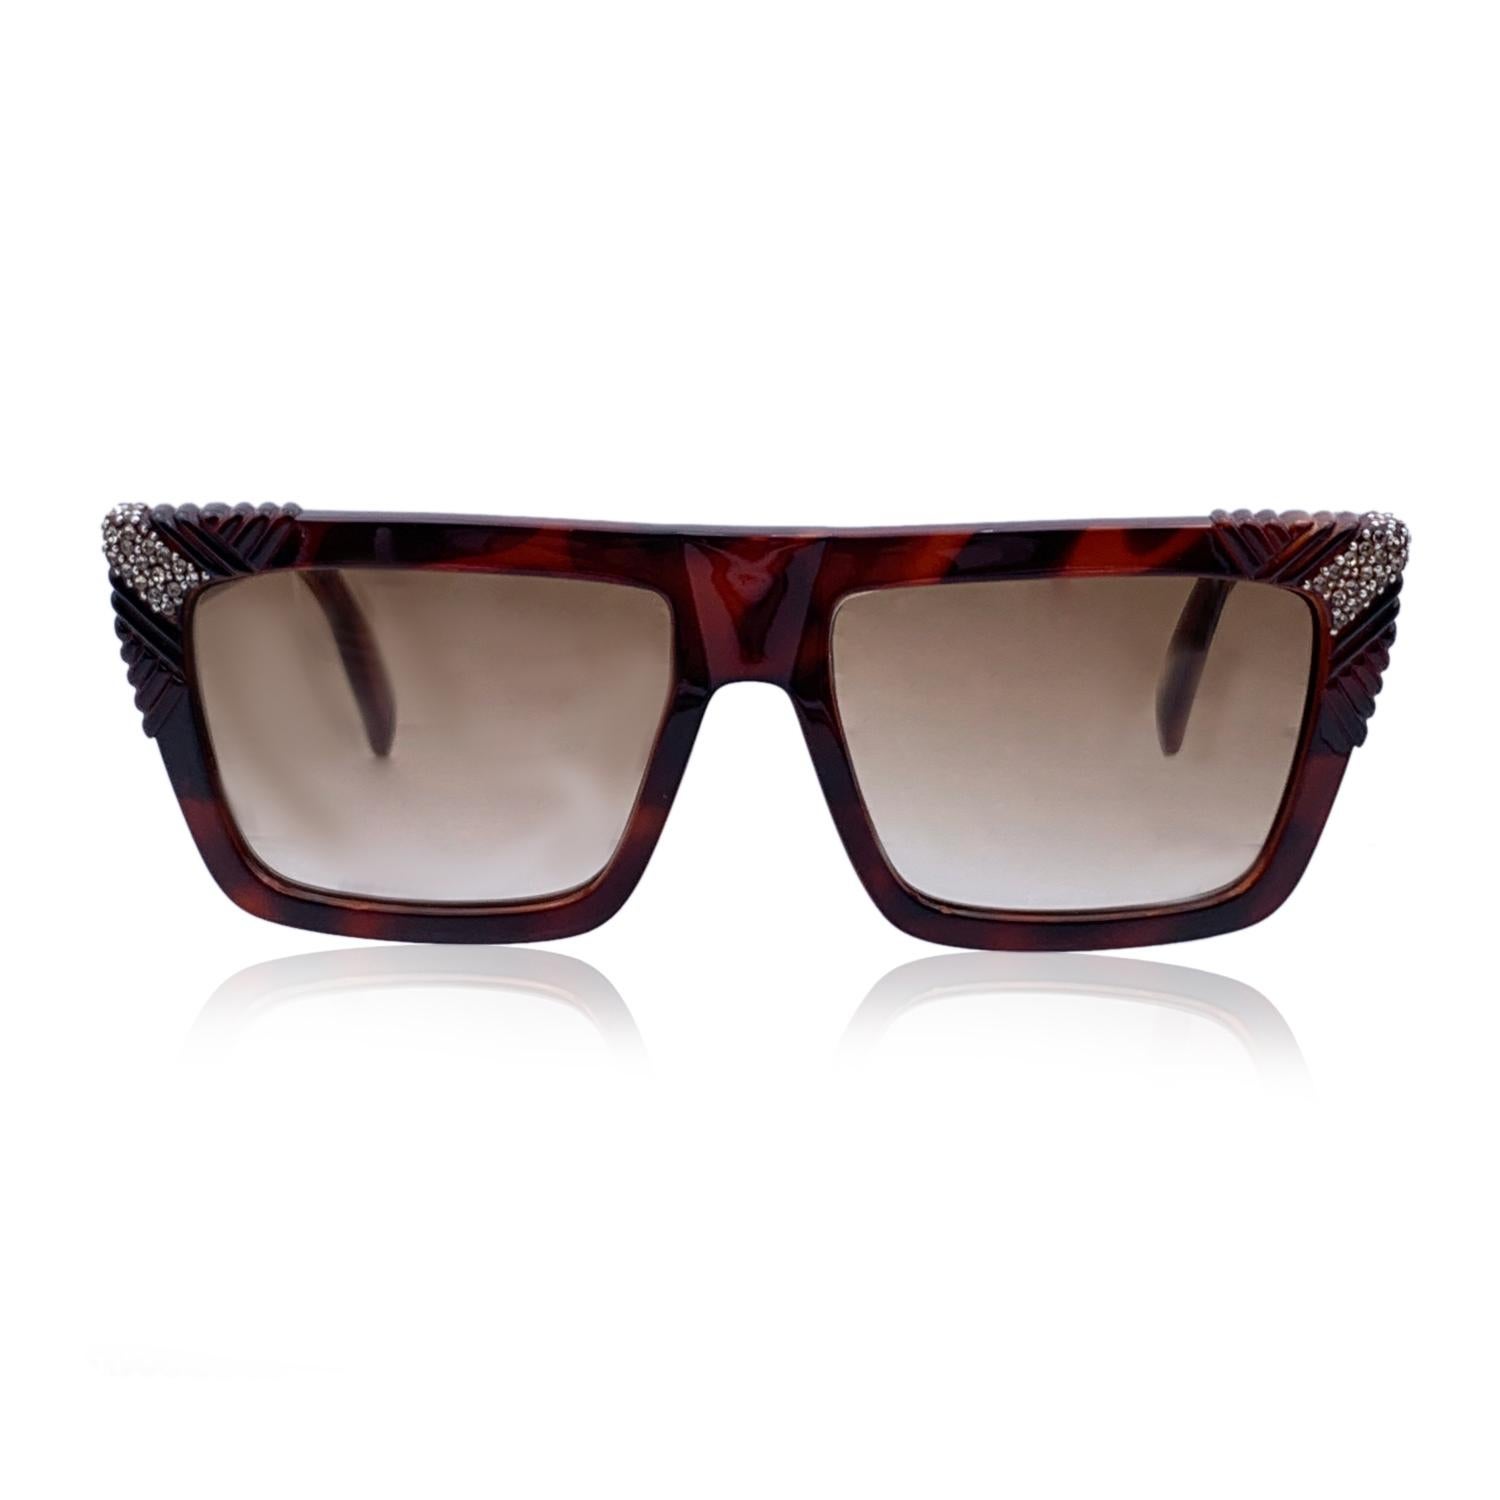 Gianni Versace Vintage Brown Sunglasses Mod. Basix 812 Col.688 In Excellent Condition For Sale In Rome, Rome